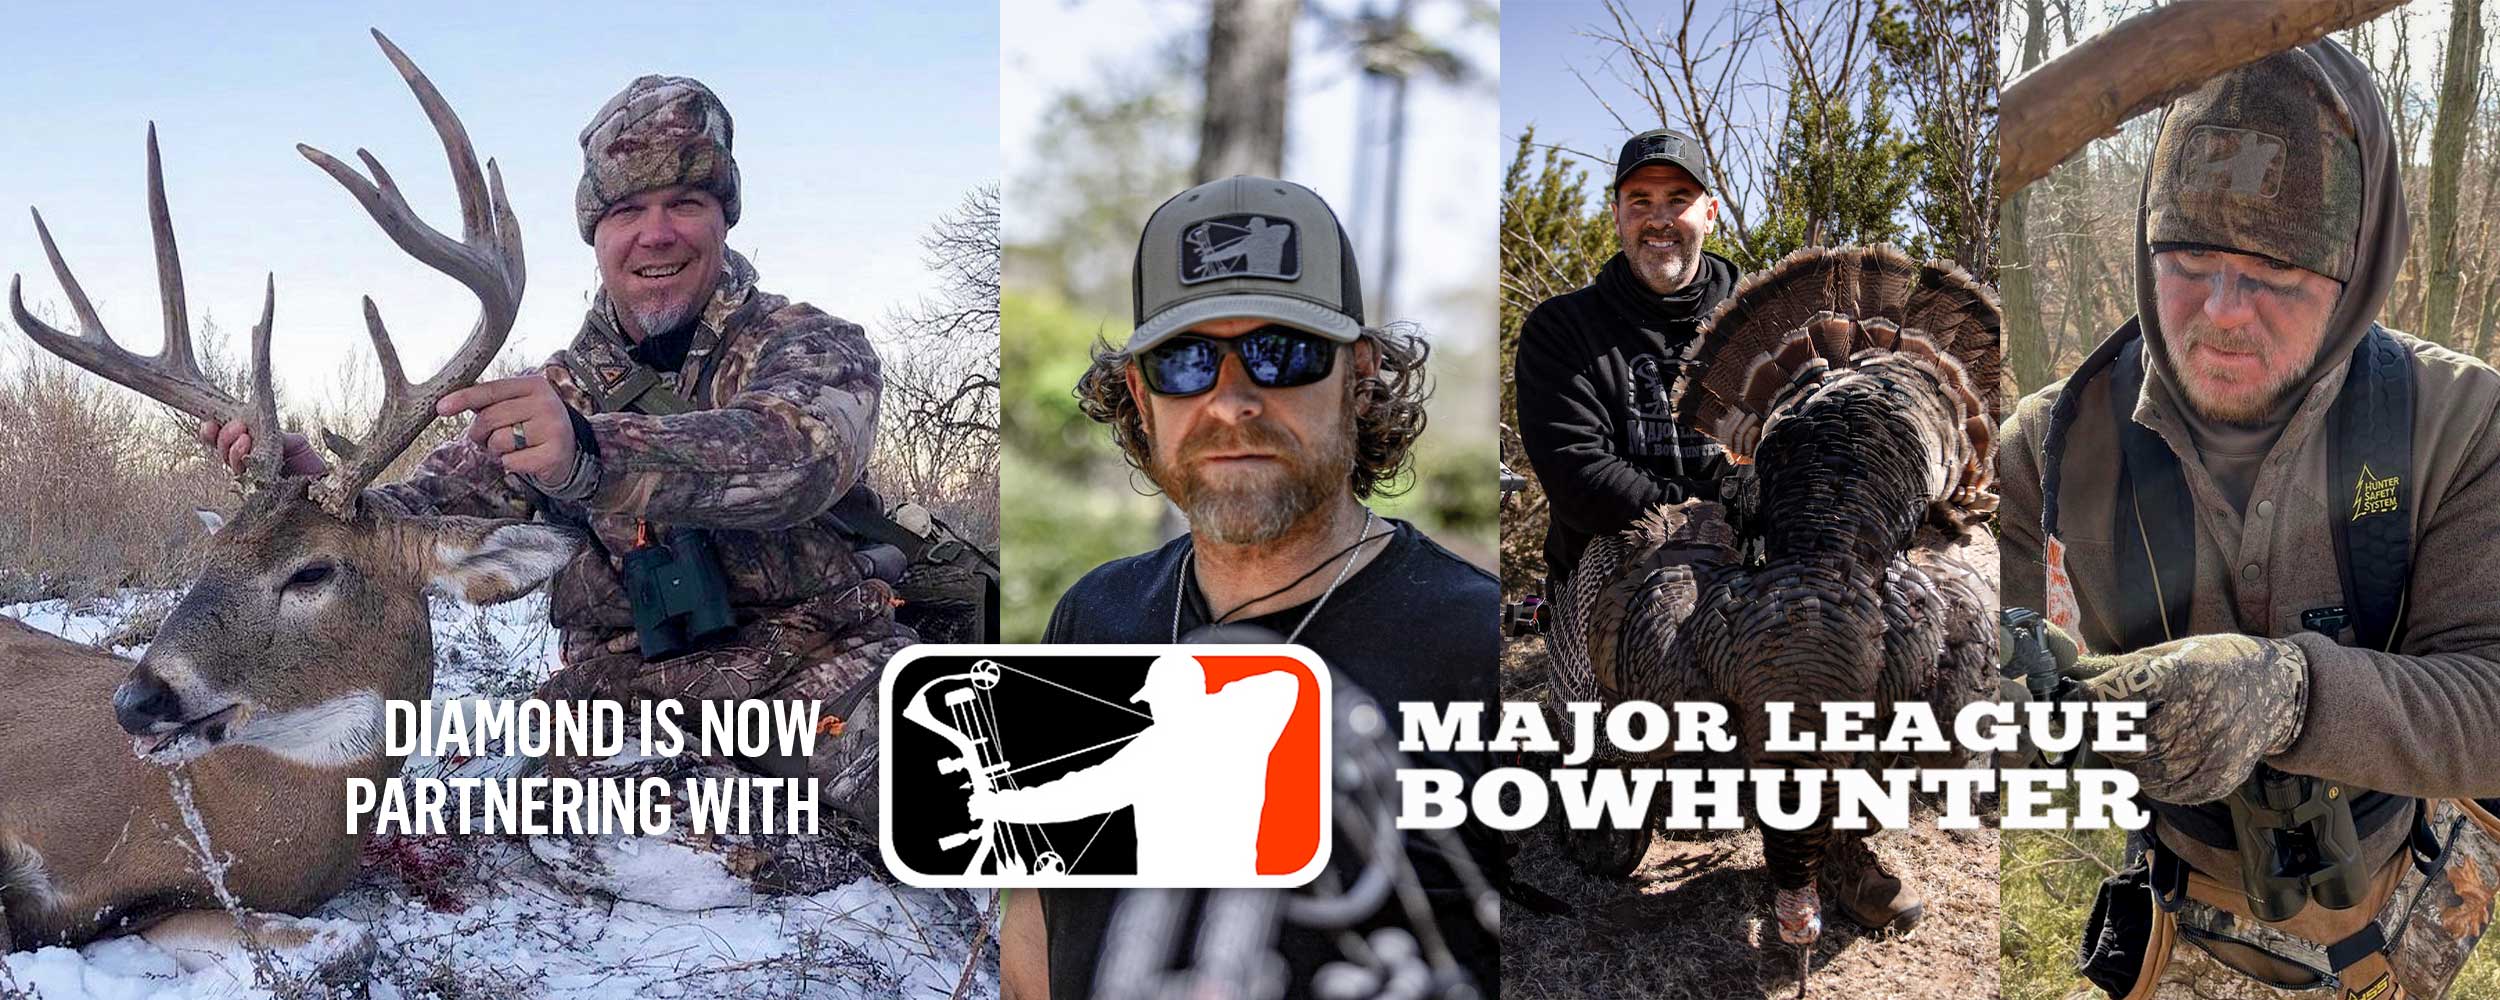 Diamond now partnering with Major League Bowhunter